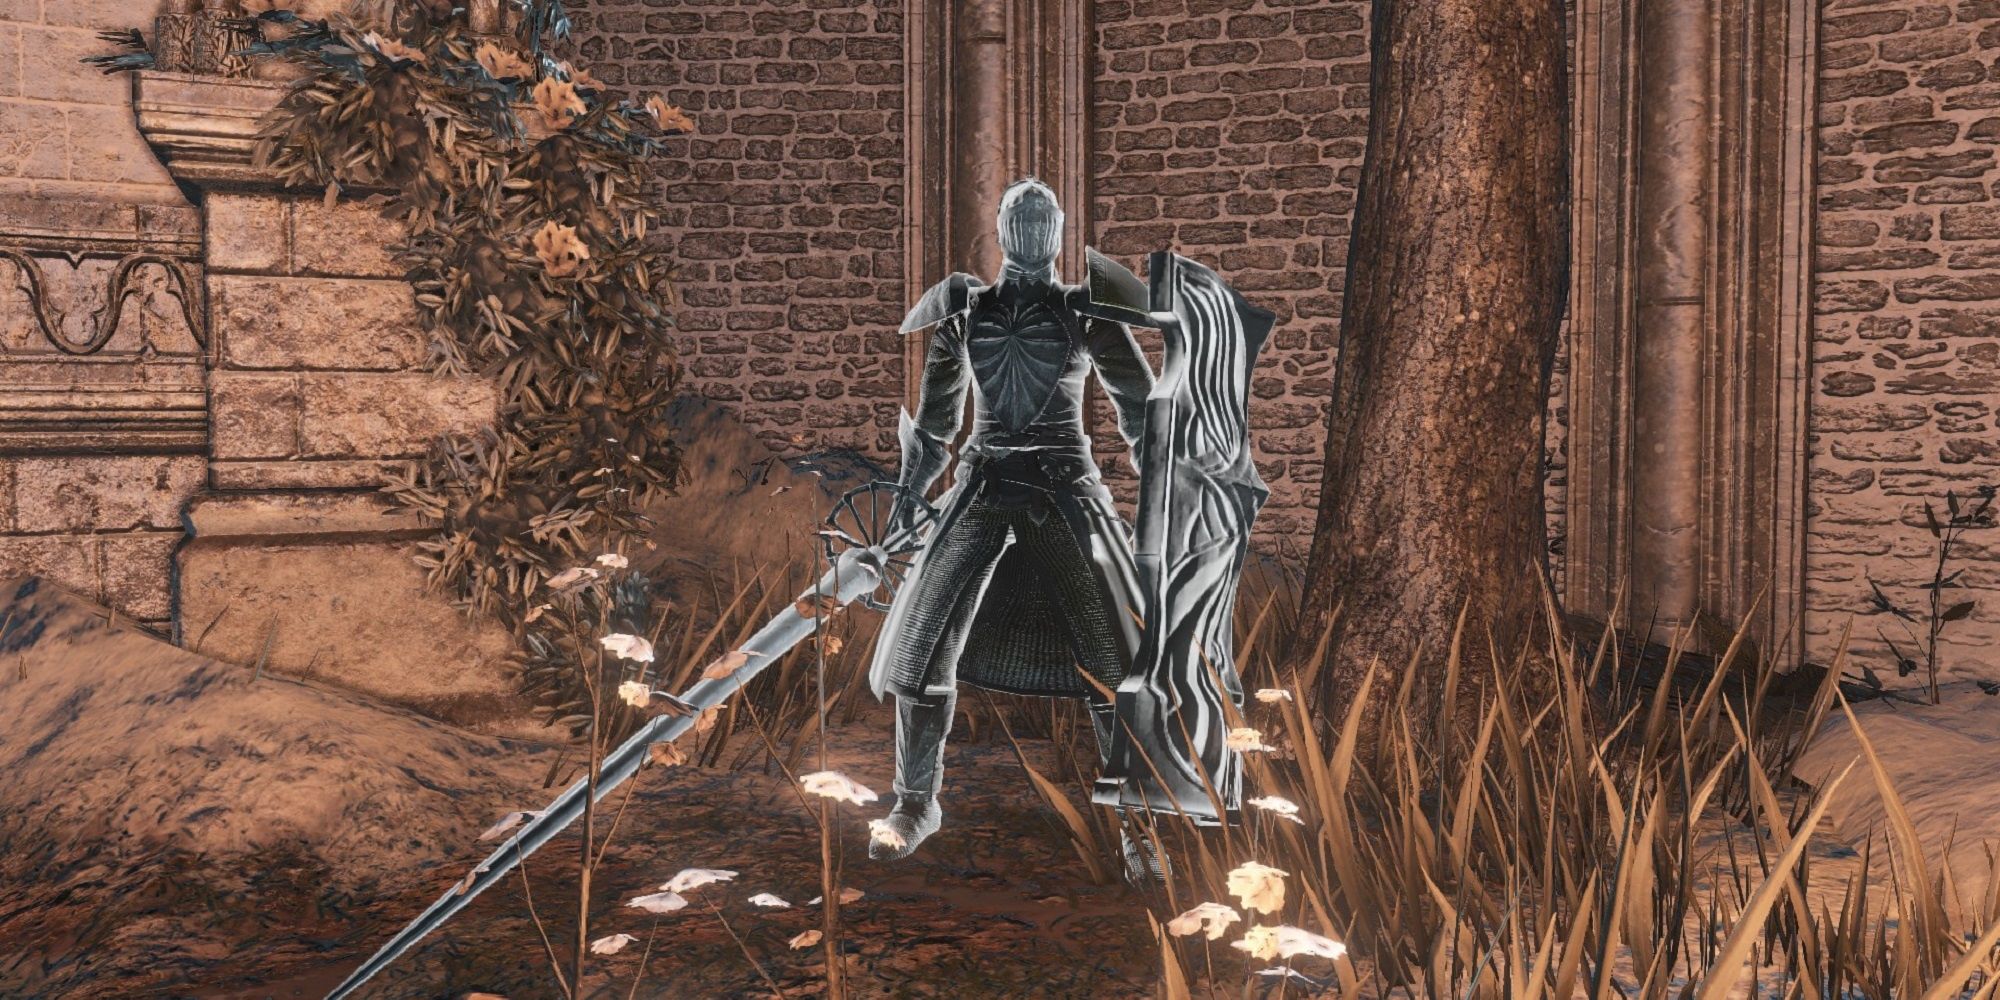 Maldron the Assassin tricking players in Dark Souls II.